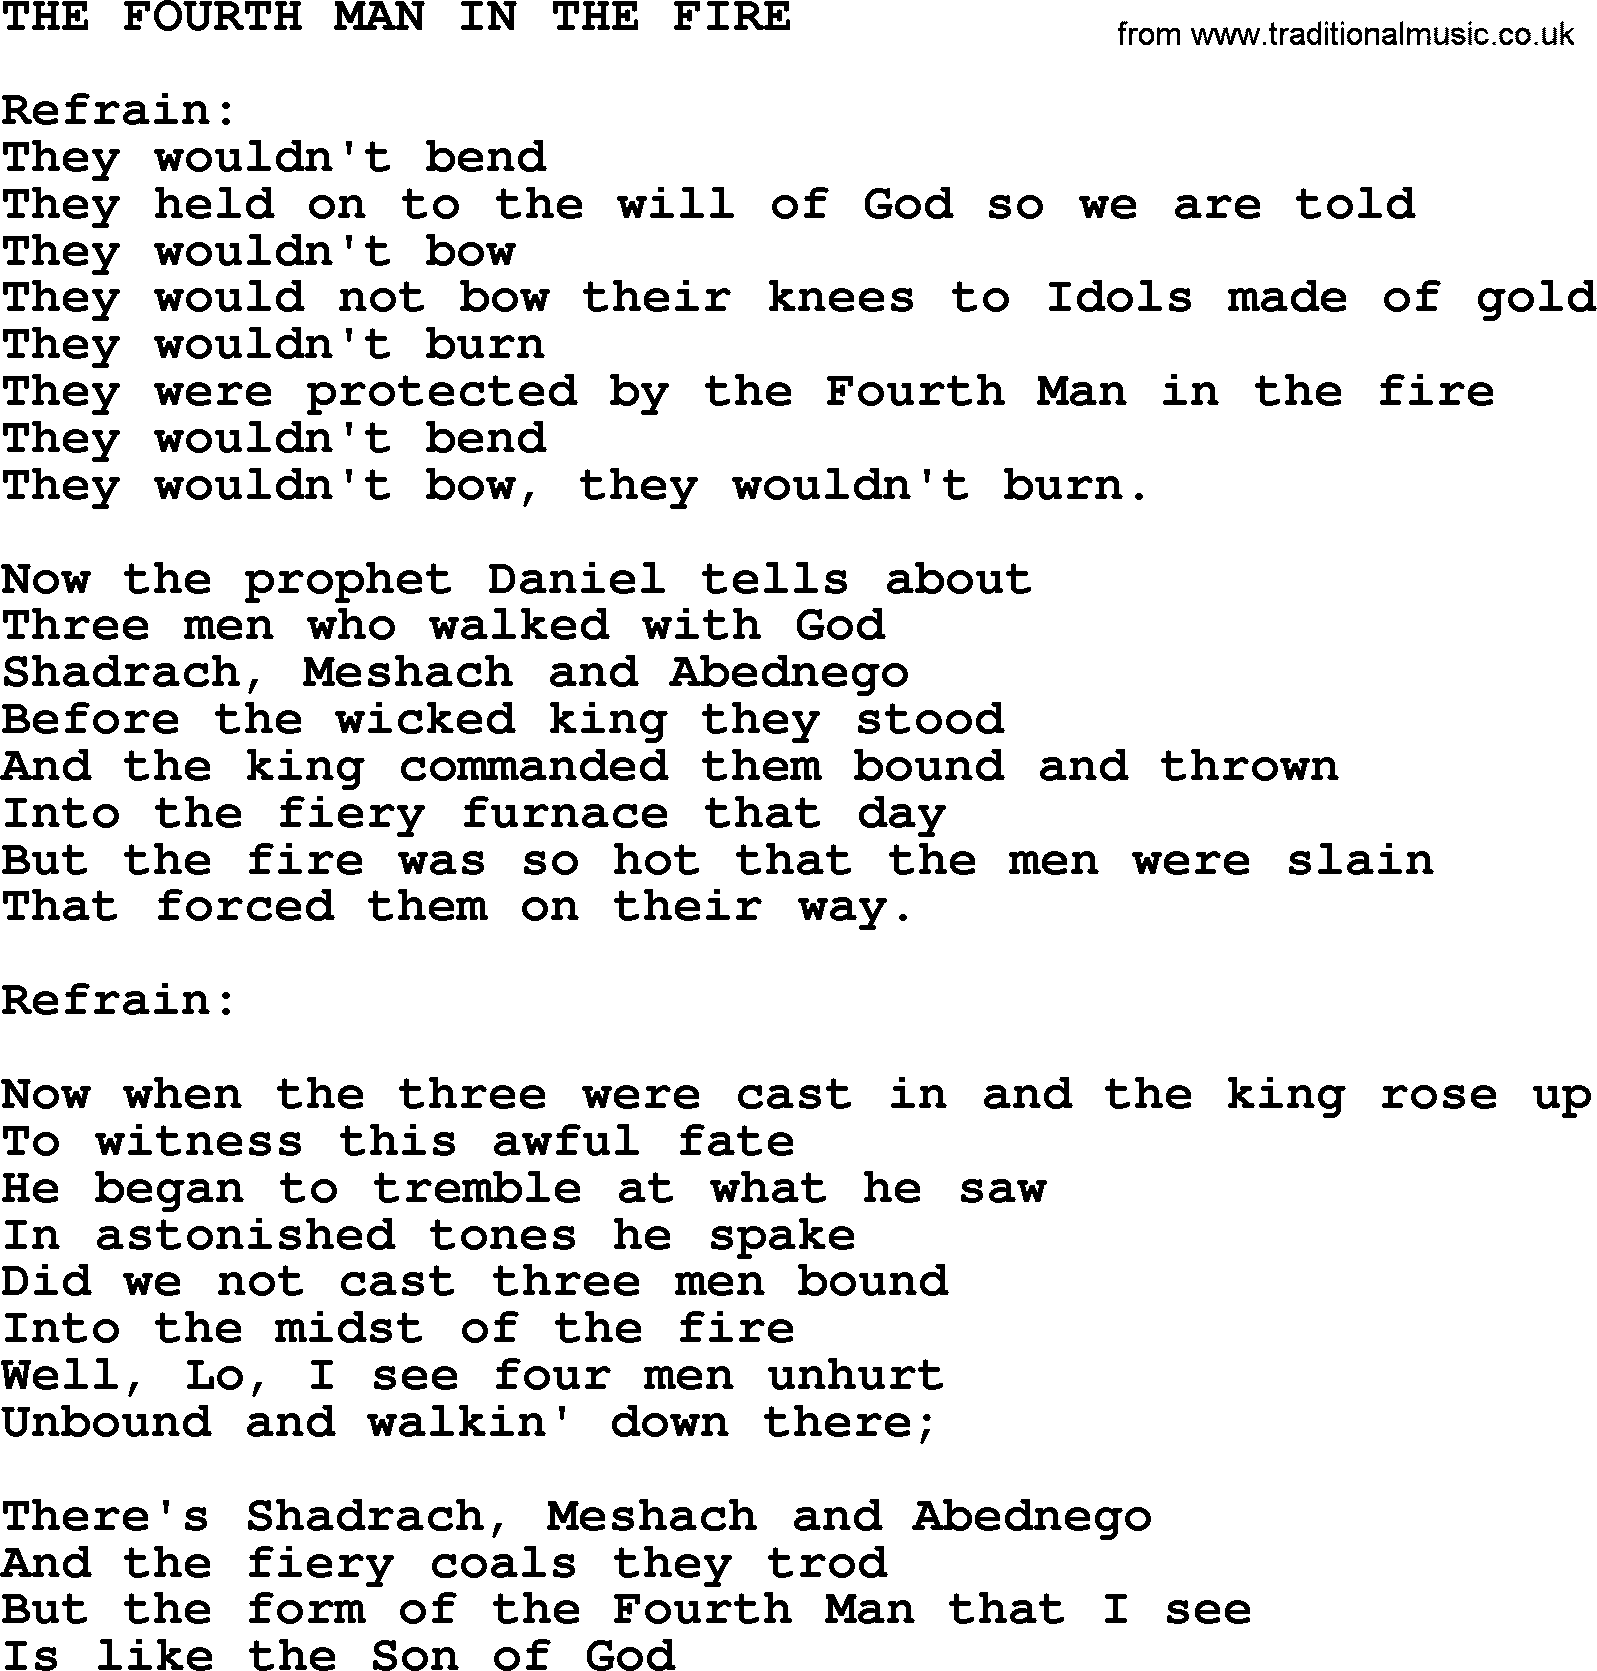 Johnny Cash song The Fourth Man In The Fire.txt lyrics